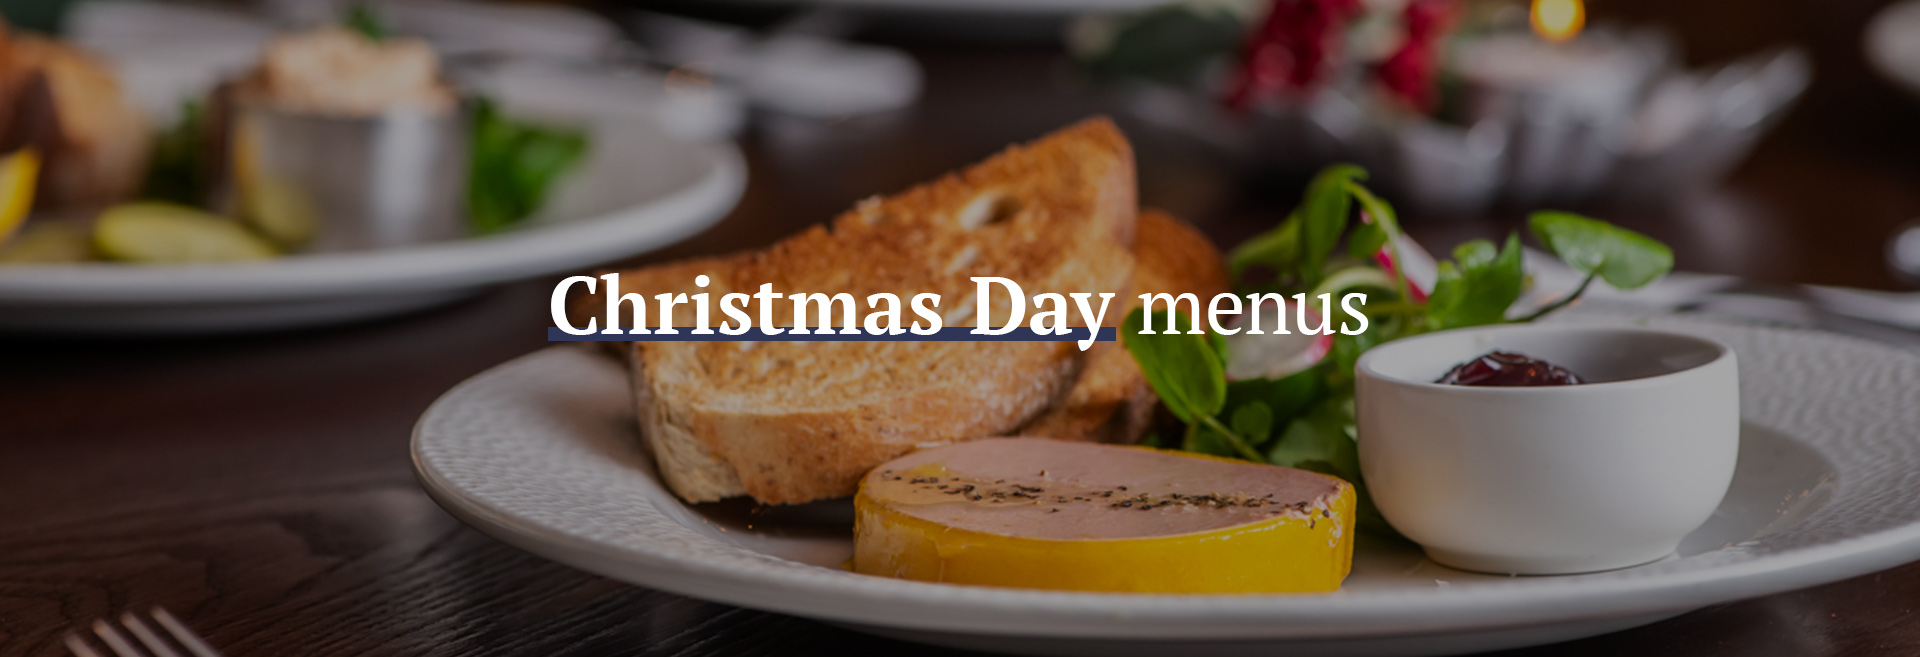 Christmas Day Menu at The Junction